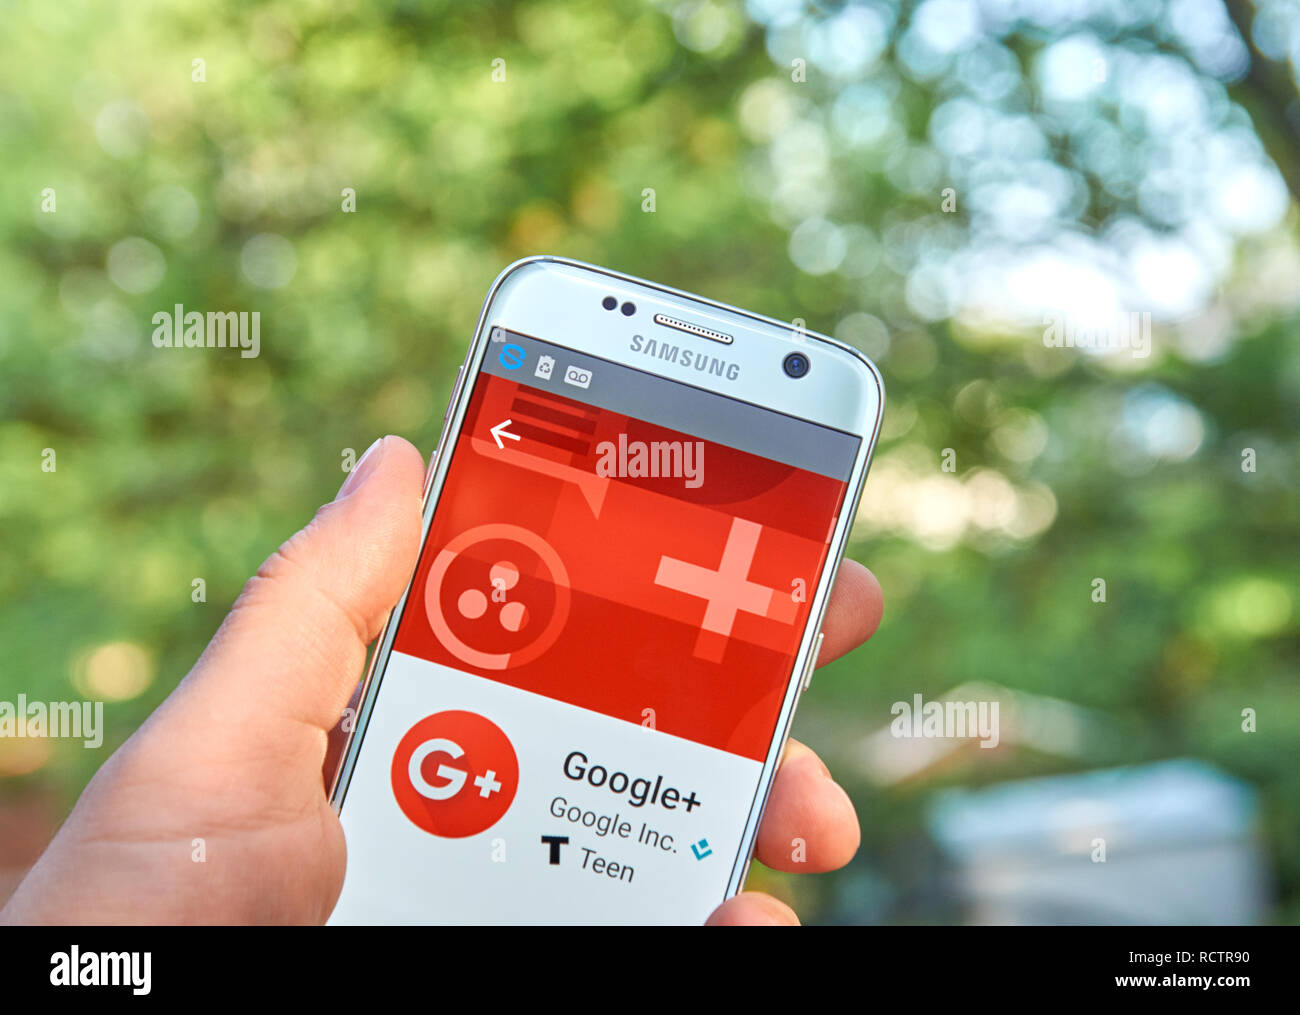 MONTREAL, CANADA - MAY 23, 2016 : Google Plus application on Samsung S7 screen. Google Plus is an interest-based social network that is owned and oper Stock Photo